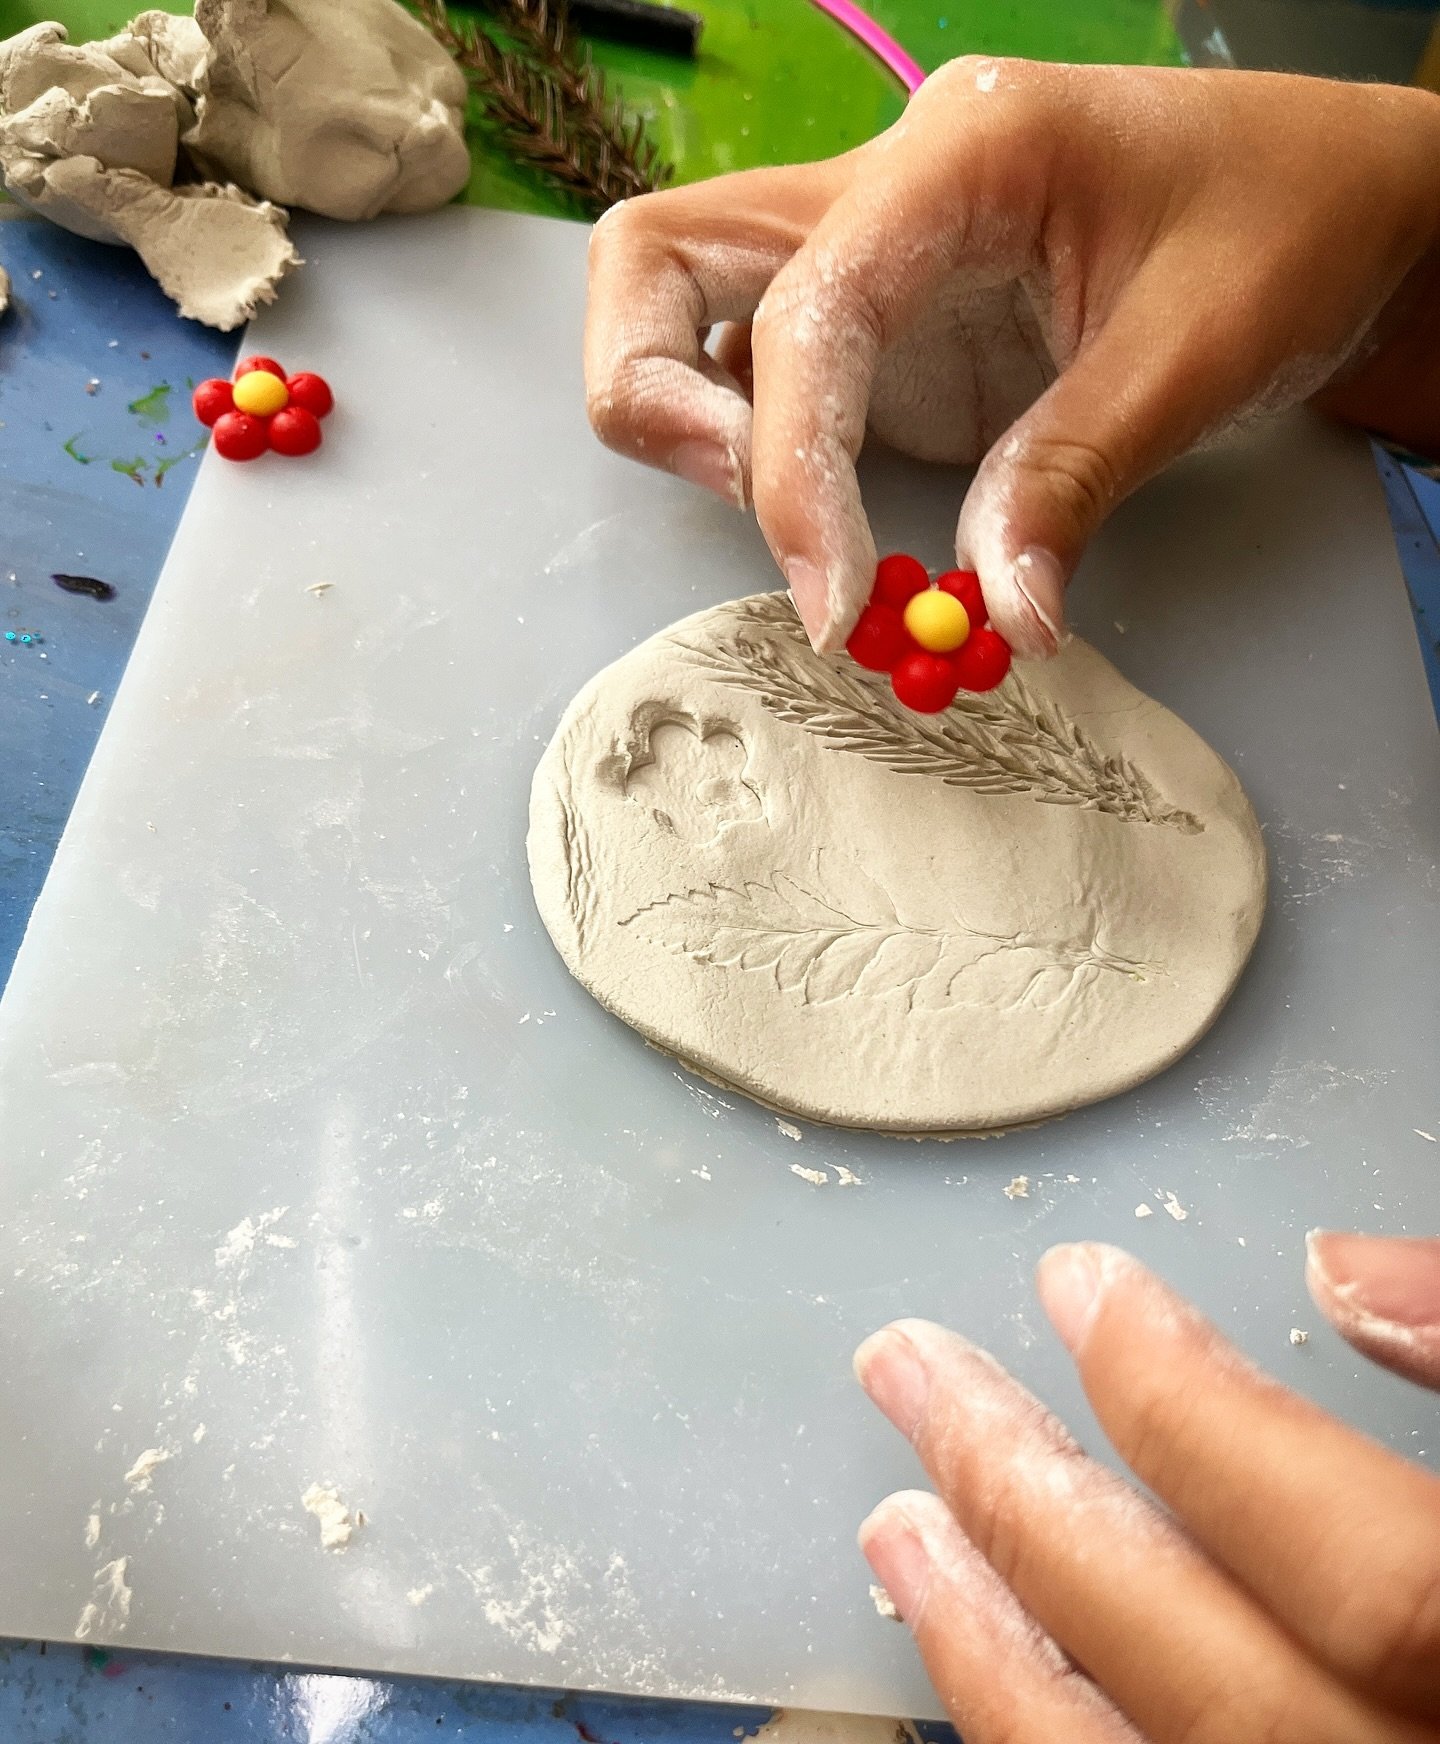 Little hands, big creativity! 🌼🍃

Our young artists are crafting beautiful clay bowls, bringing nature&rsquo;s designs to life. 

#KidsCrafts #ClayArt #NatureInArt #arteducationforkids #tseungkwano #activitiesforkids